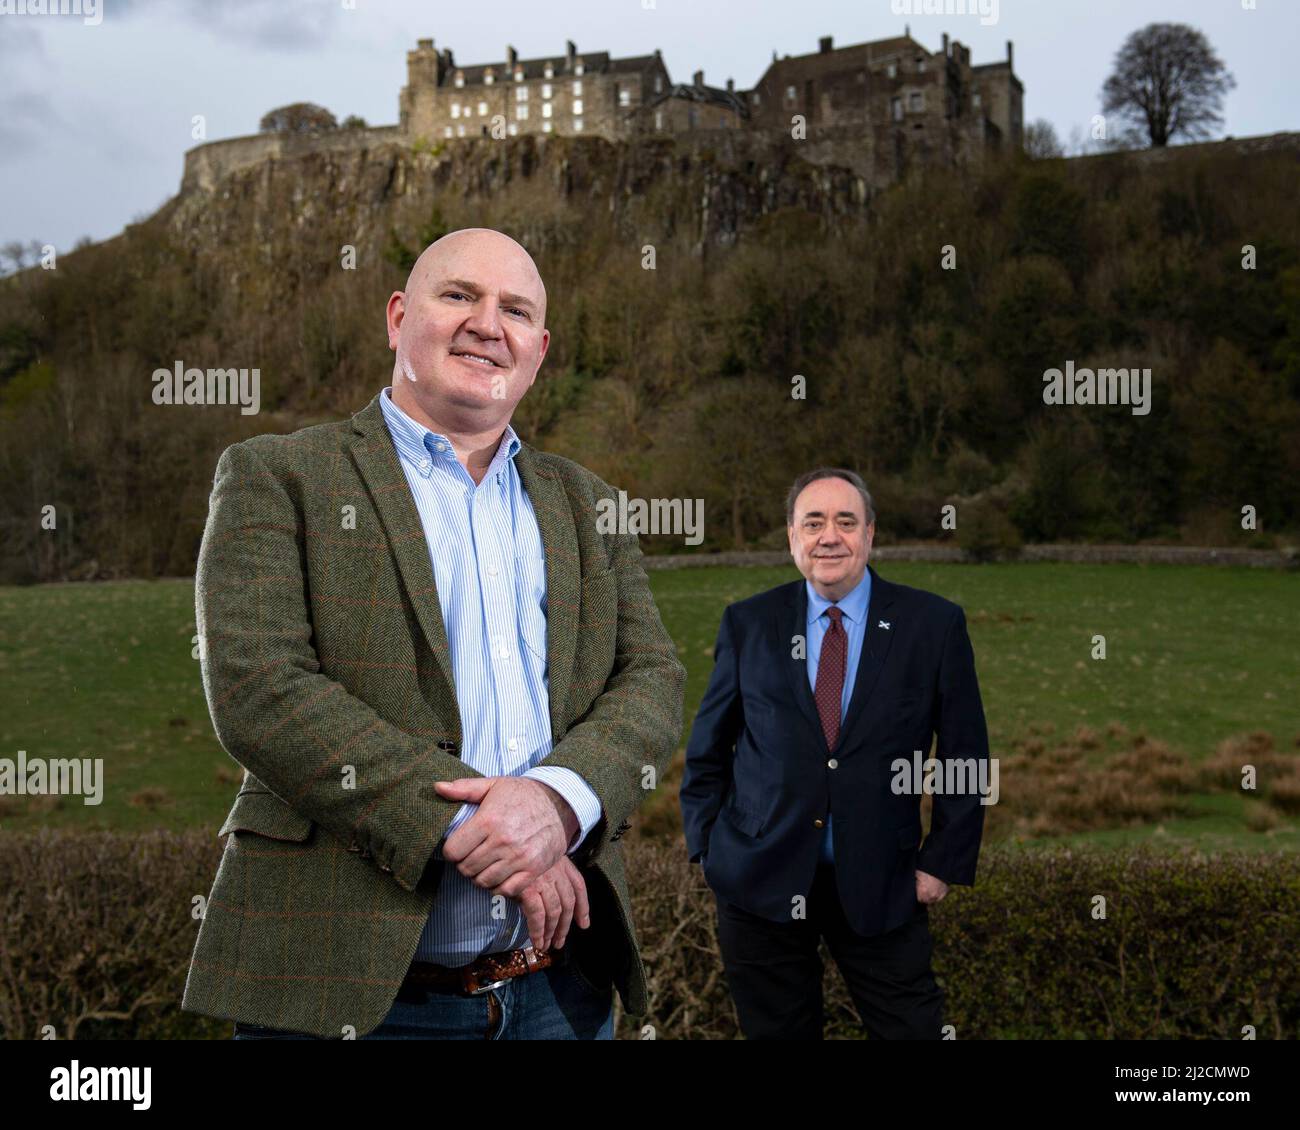 Stirling, Scotland, UK. 13 April 2021.  PICTURED: (L-R) Neale Hanvey MP; Rt Hon Alex Salmond - Alba Party Leader. Alba Party Leader, Rt Hon Alex Salmond unveils his candidates for Mid Scotland and Fife region.  Credit: Colin Fisher/Alamy Live News Stock Photo